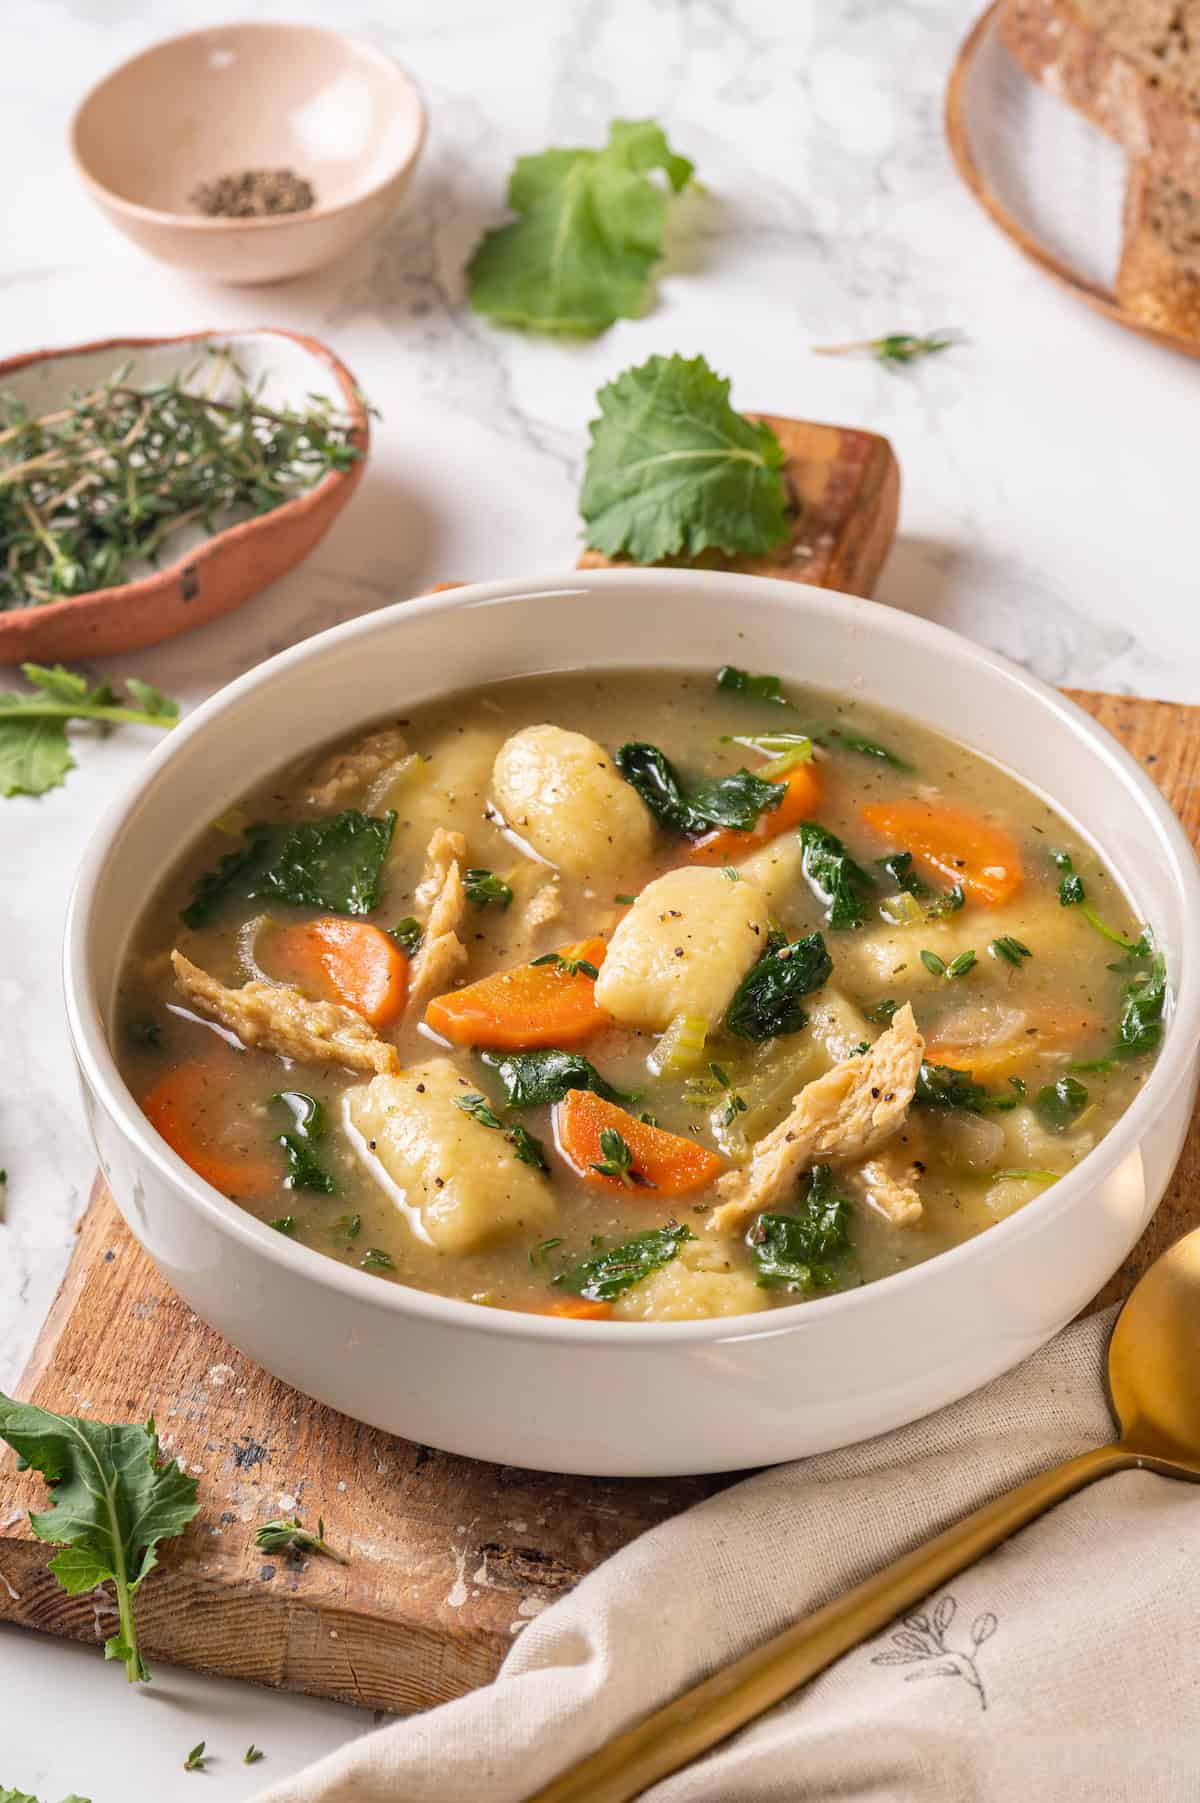 Bowl of gnocchi soup with kale and vegan chicken